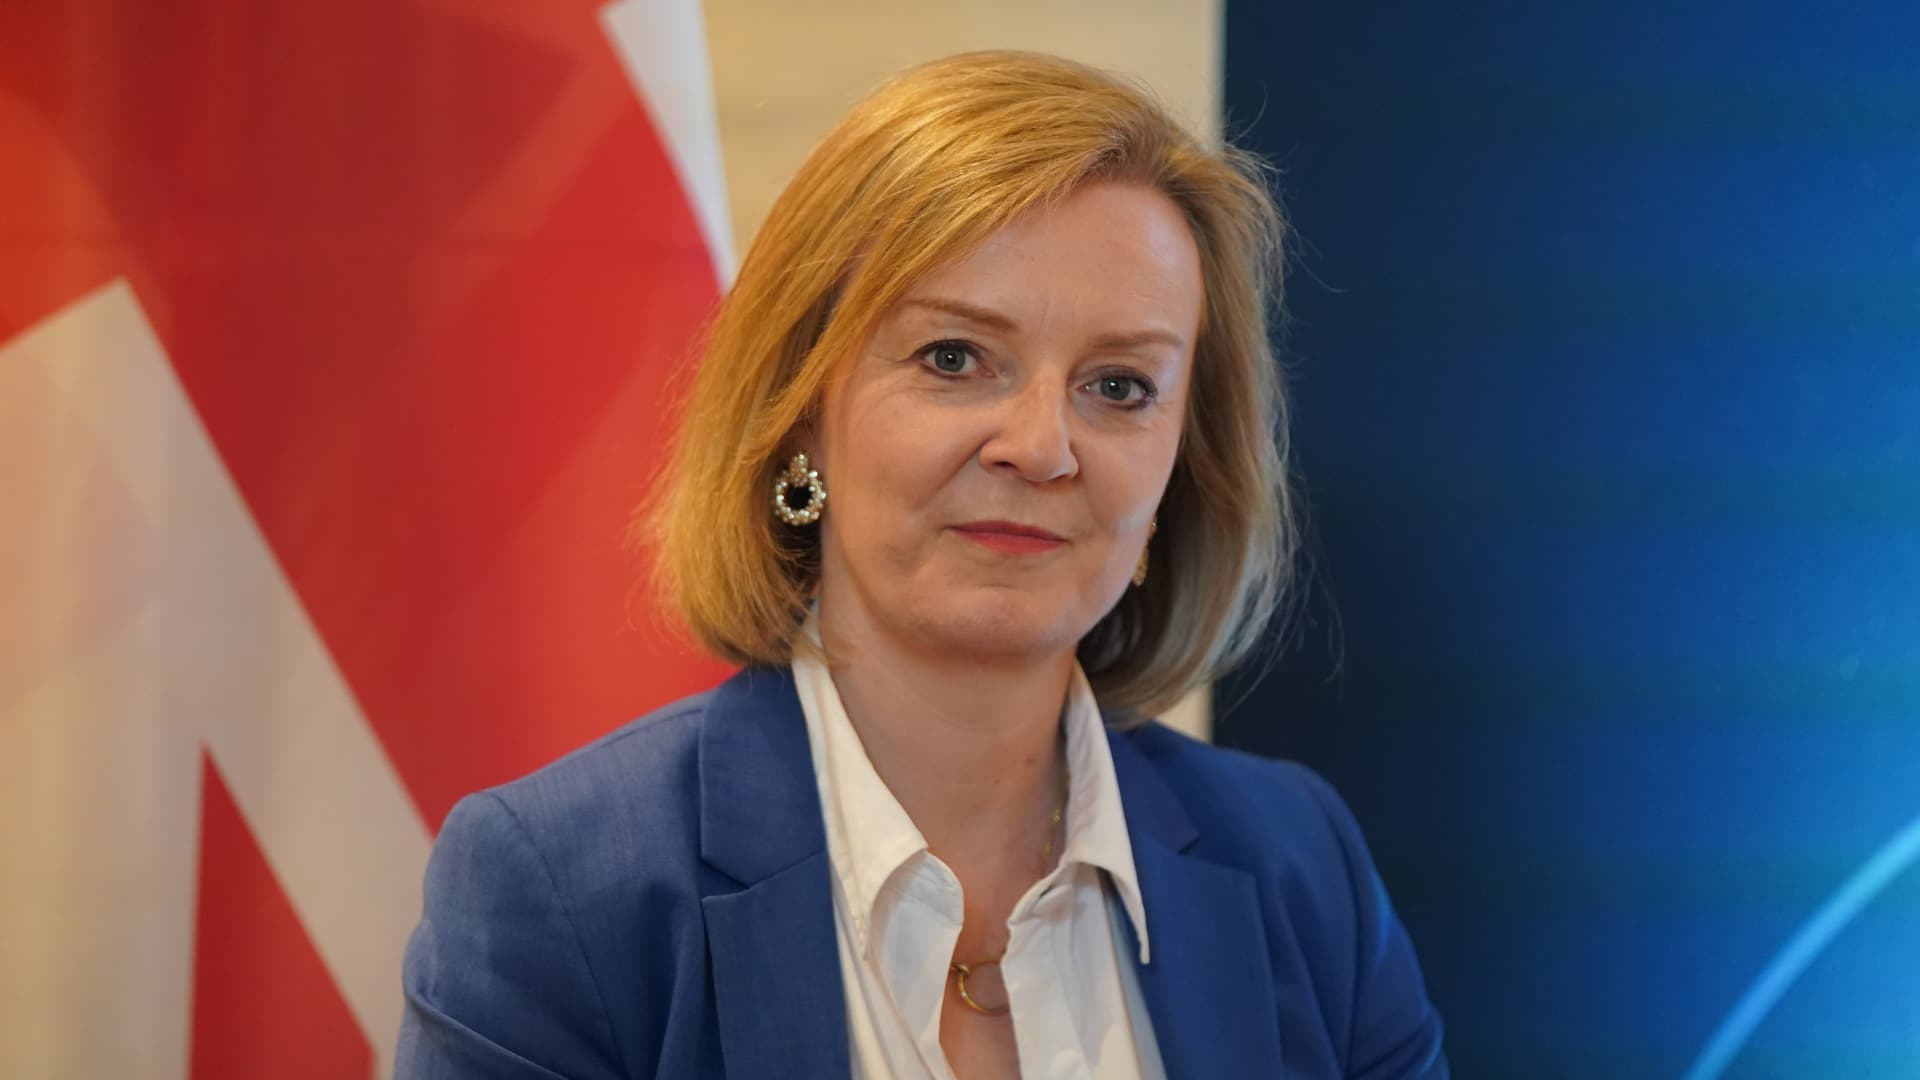 Elizabeth Truss, Foreign Minister of Great Britain, sits in a bilateral discussion with her Japanese counterpart during the summit of foreign ministers of the G7 group of leading democratic economic powers at the Schlossgut Weissenhaus. The G7 countries of Germany, Great Britain, France, Italy, Canada and Japan are joined by the foreign minister of Ukraine.